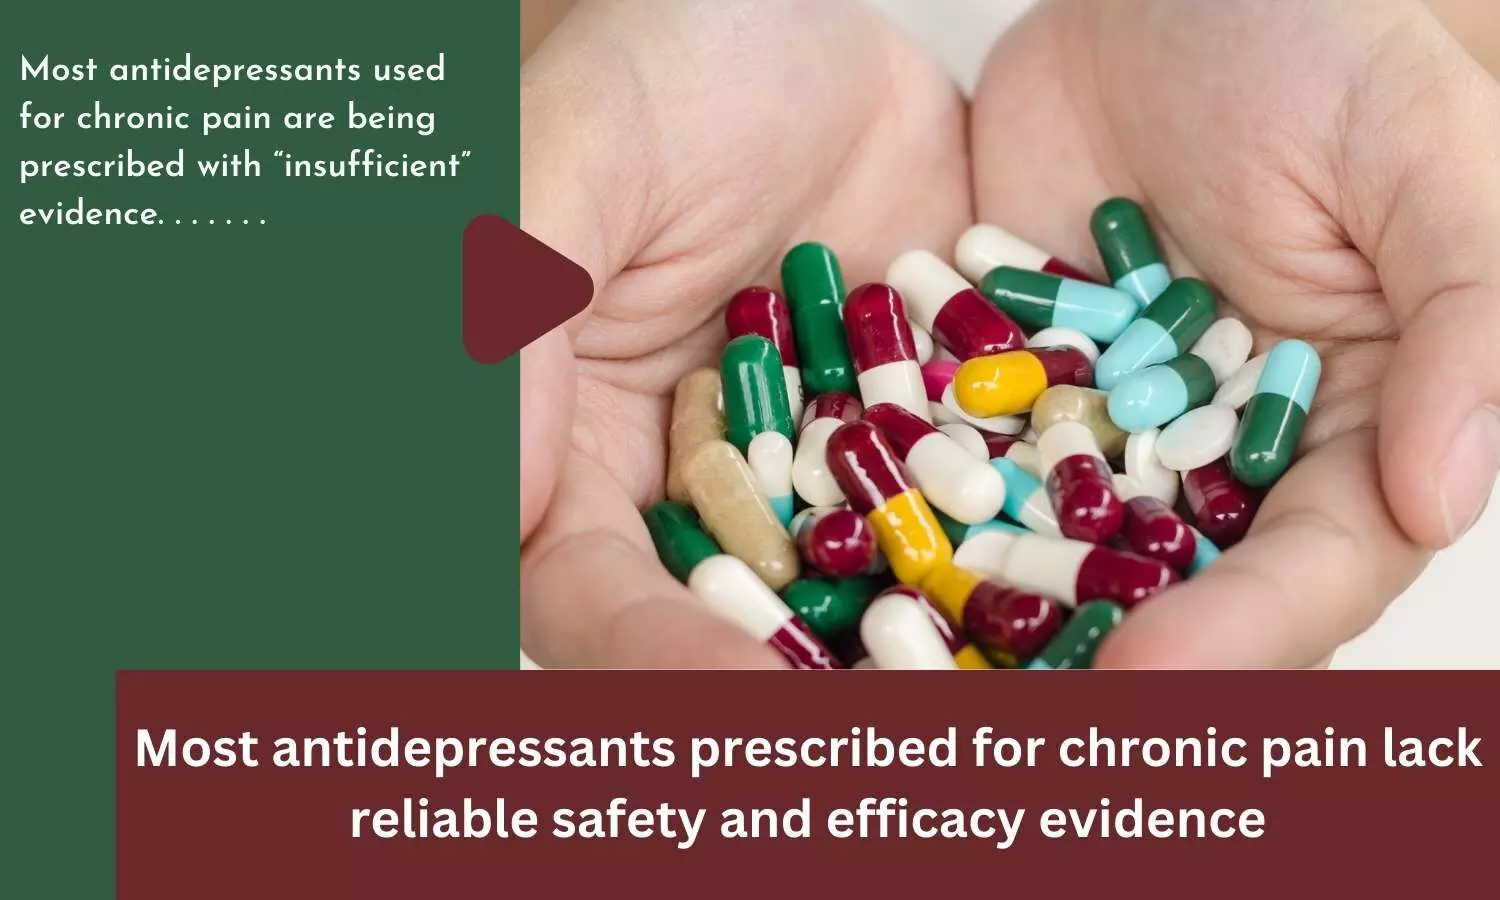 Most antidepressants prescribed for chronic pain lack reliable safety and efficacy evidence